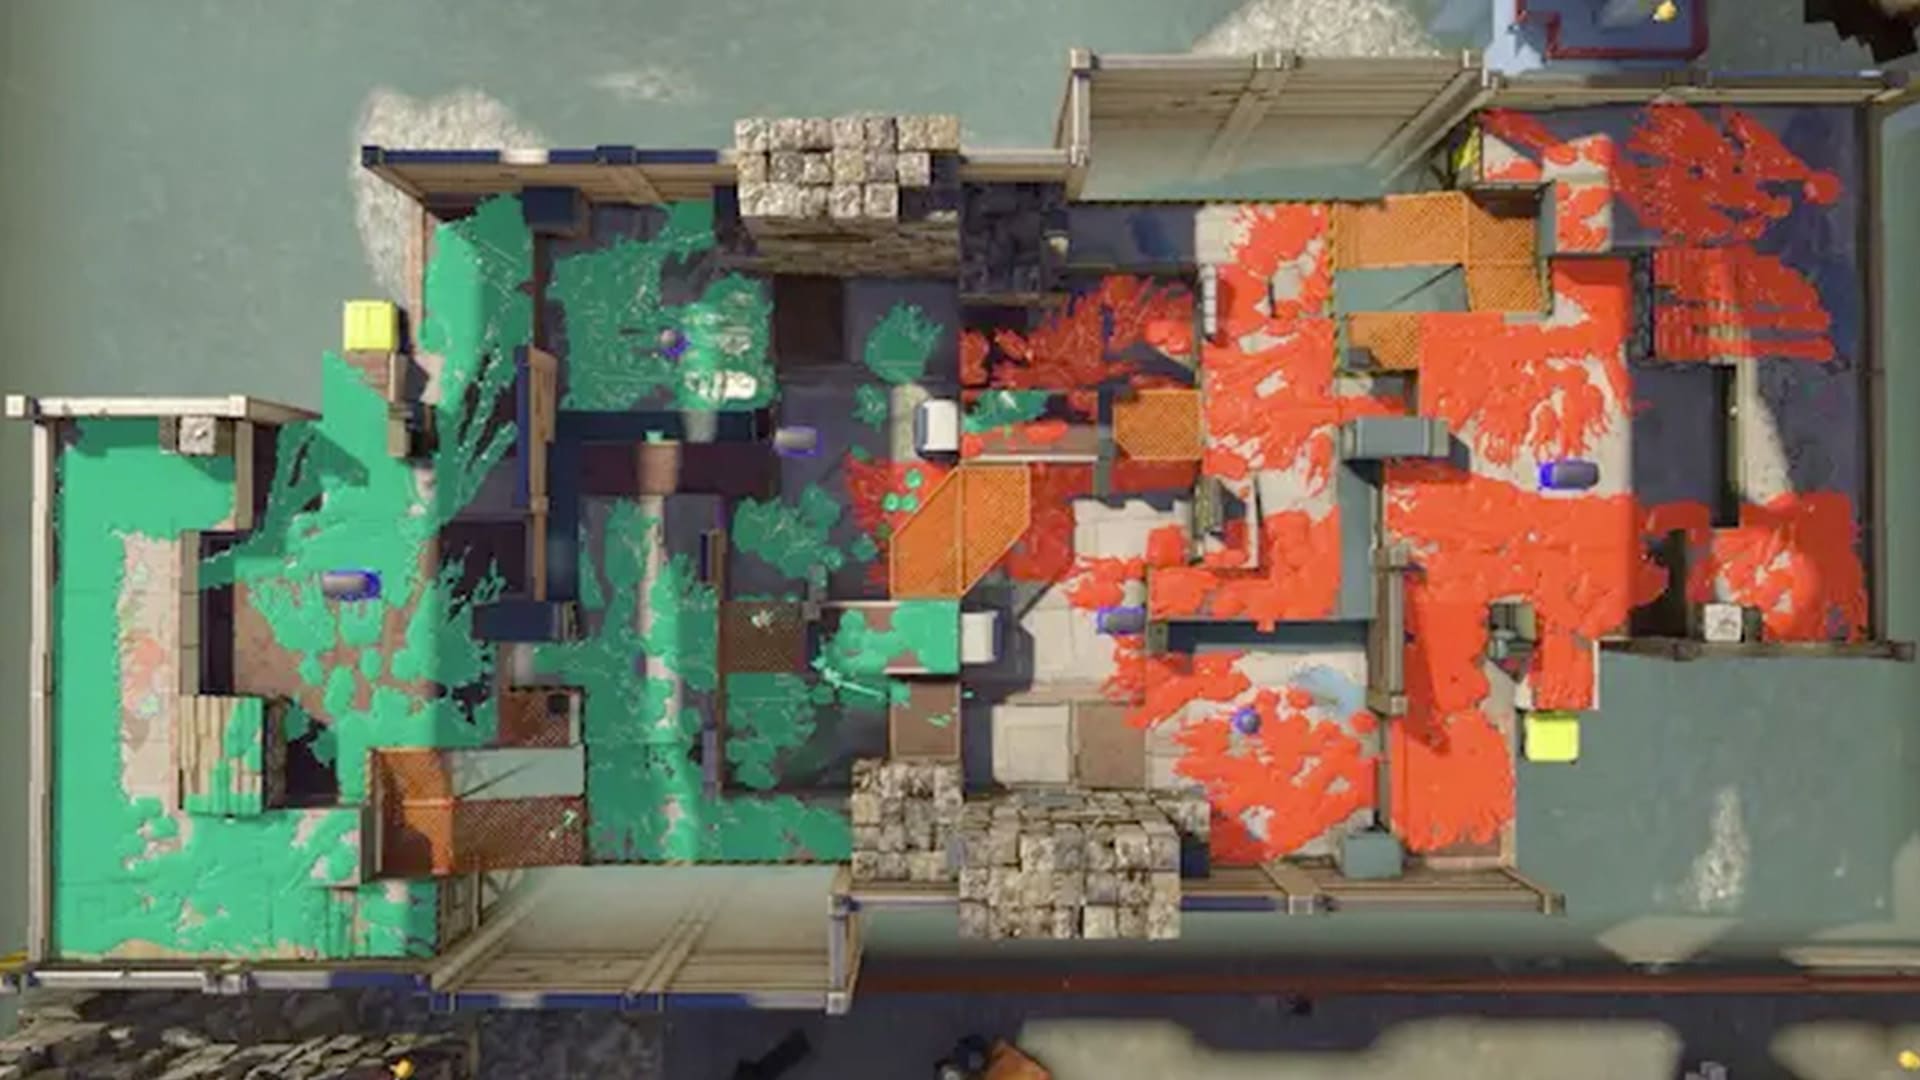 Catch up on what Splatoon 3 has to offer Turf War